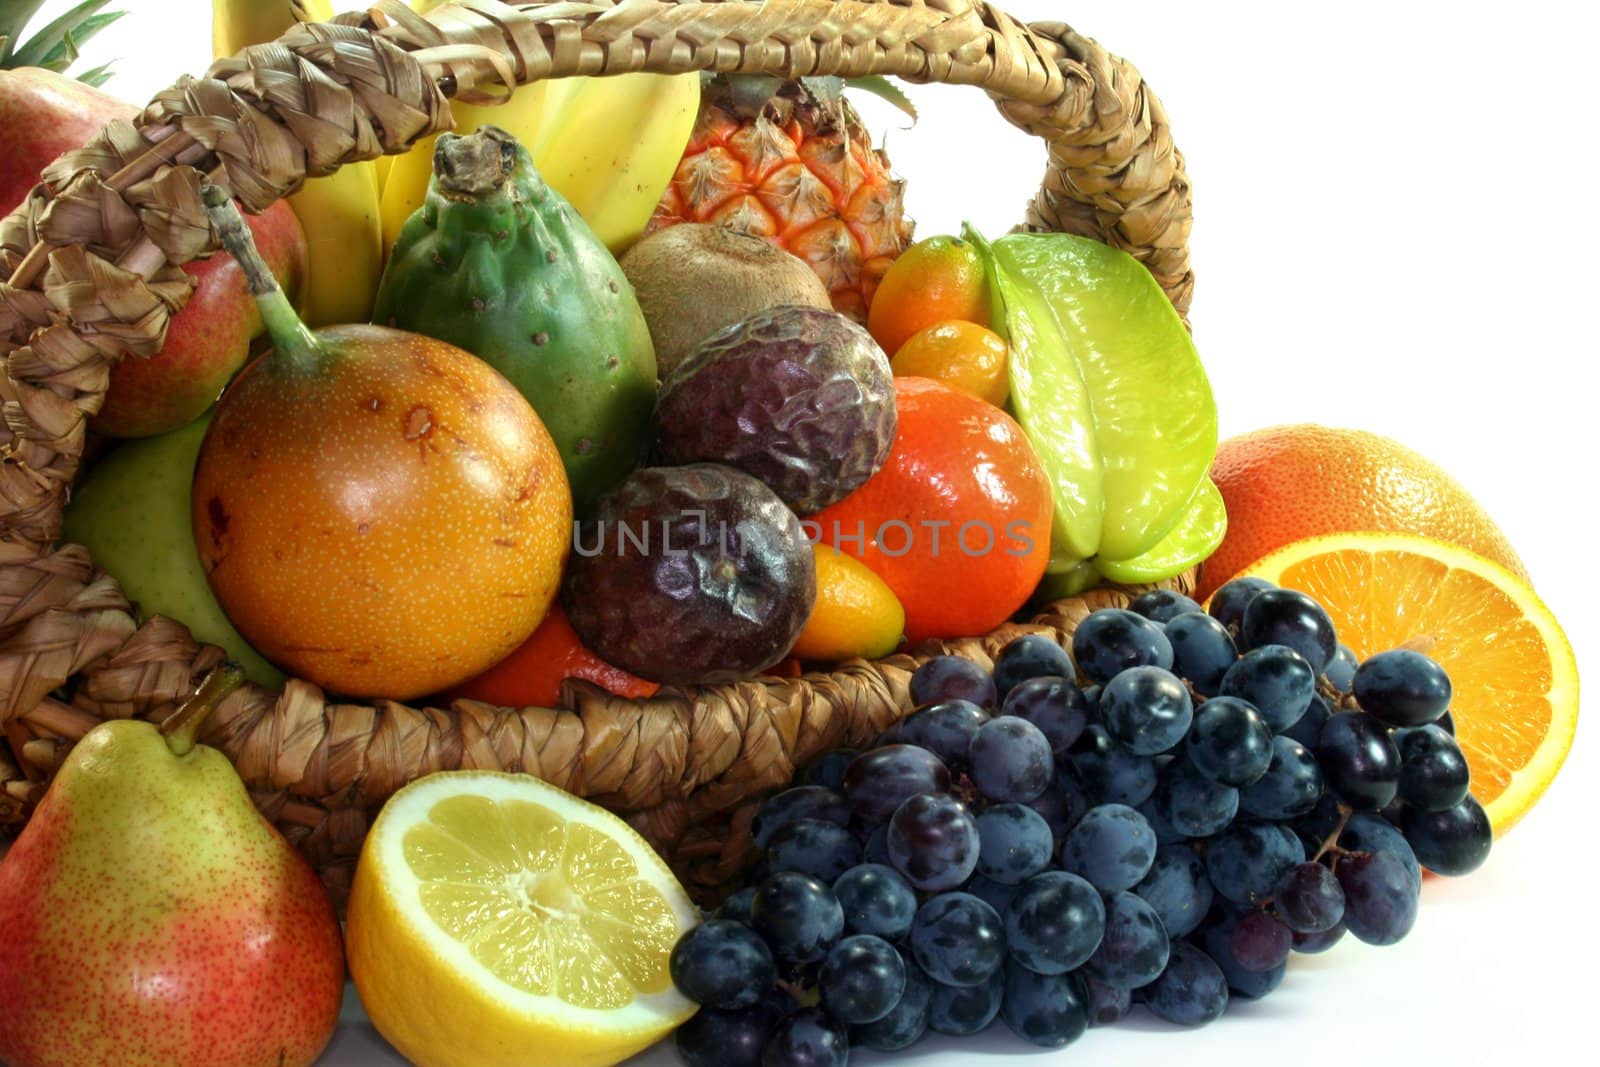 a basket filled with delicious fruits